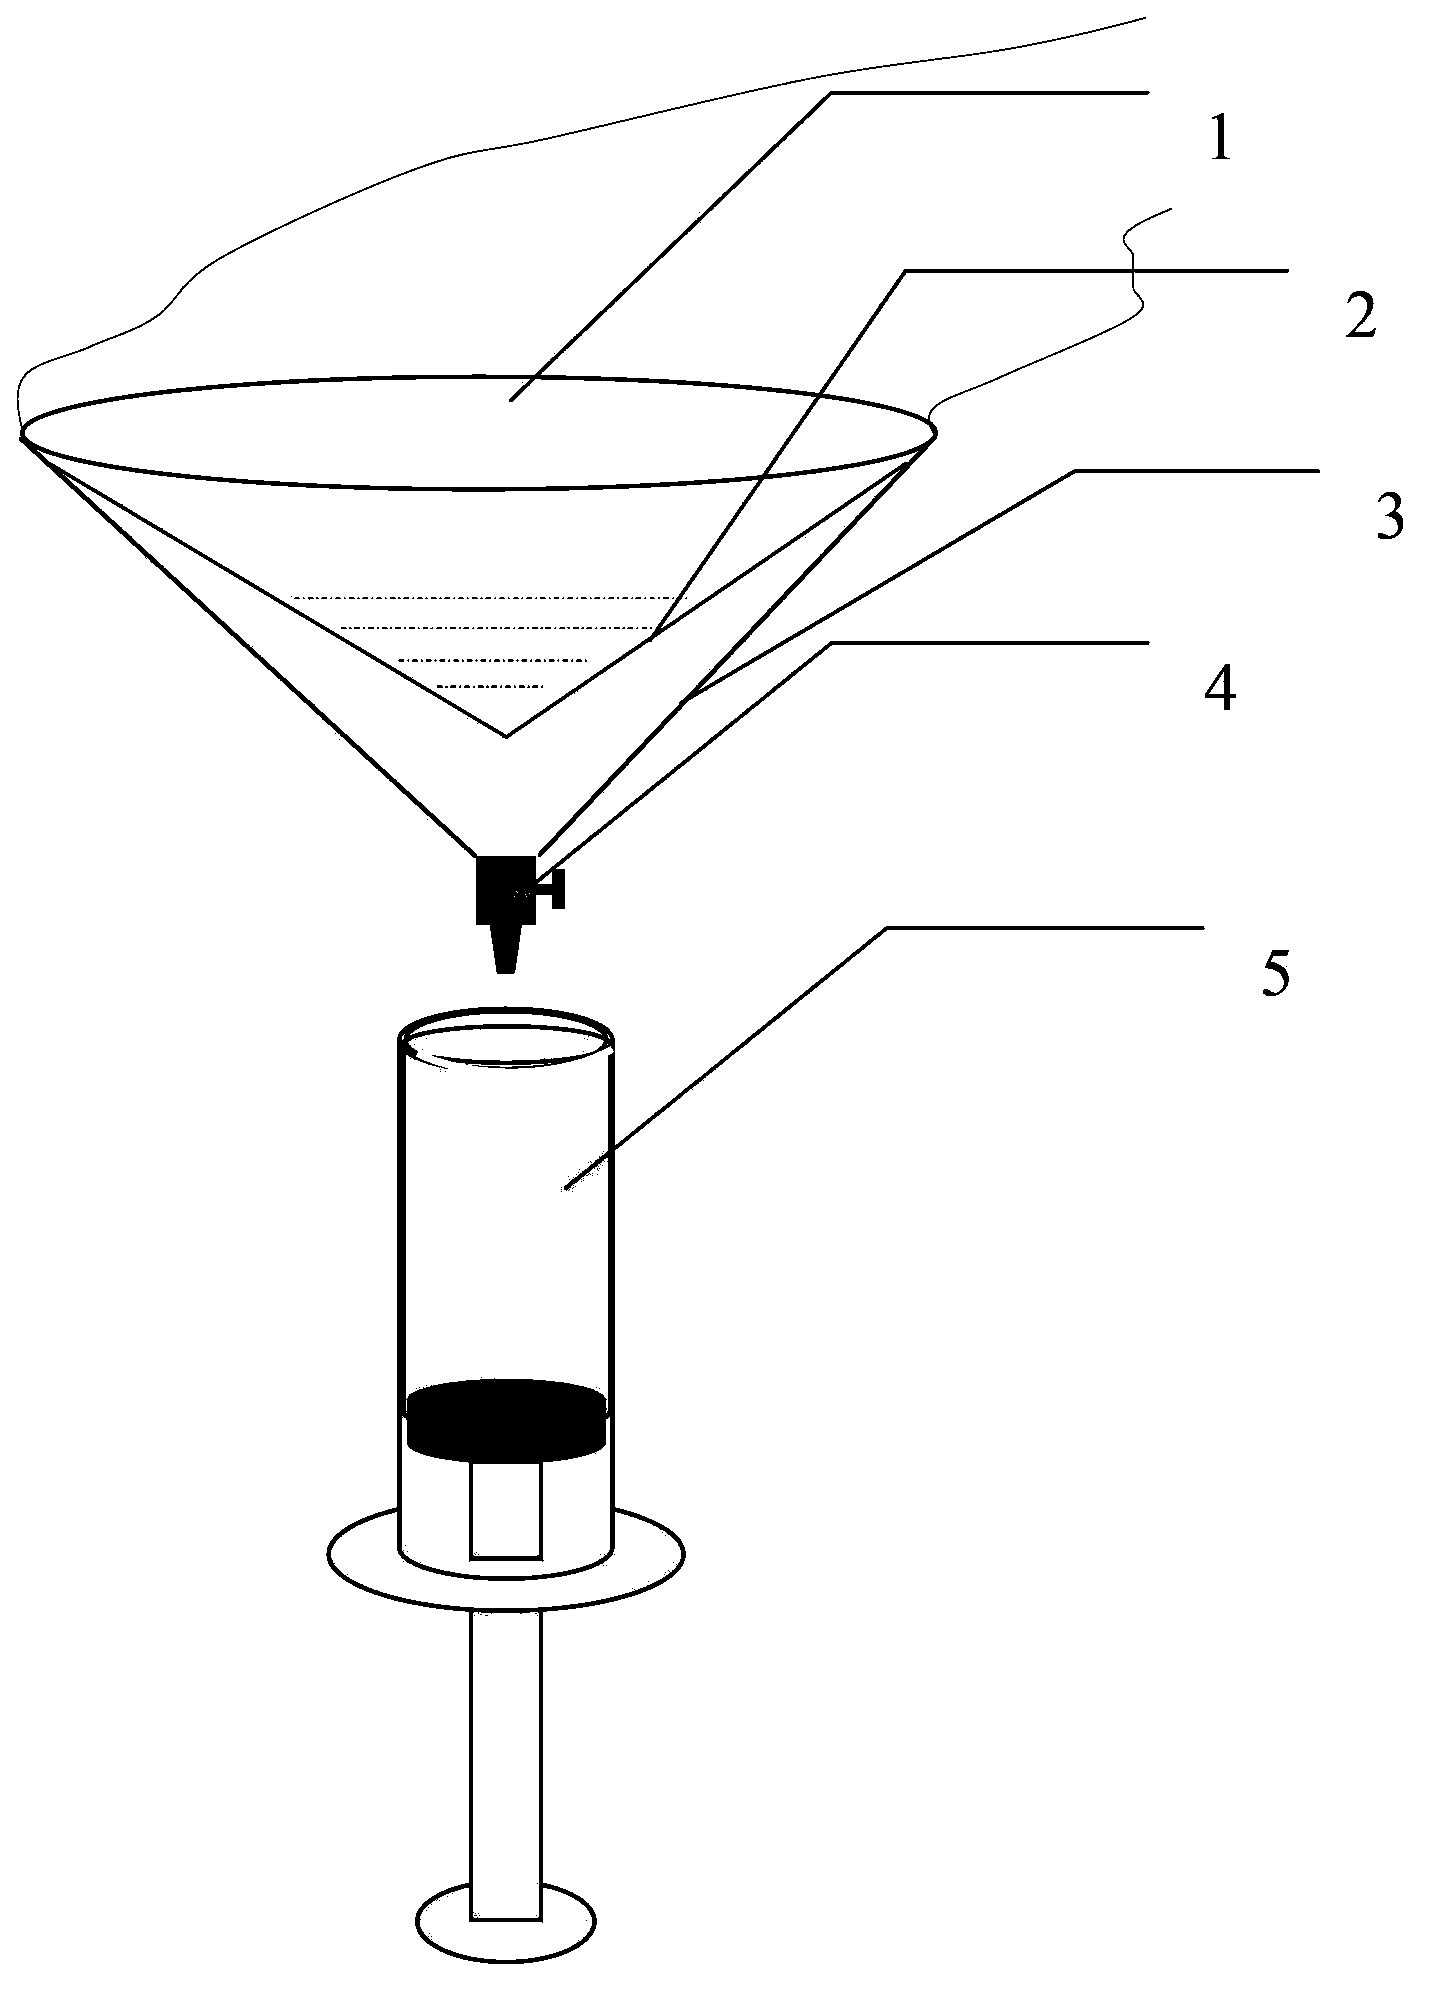 Method for determining water-soluble Fe content of eutrophic lake